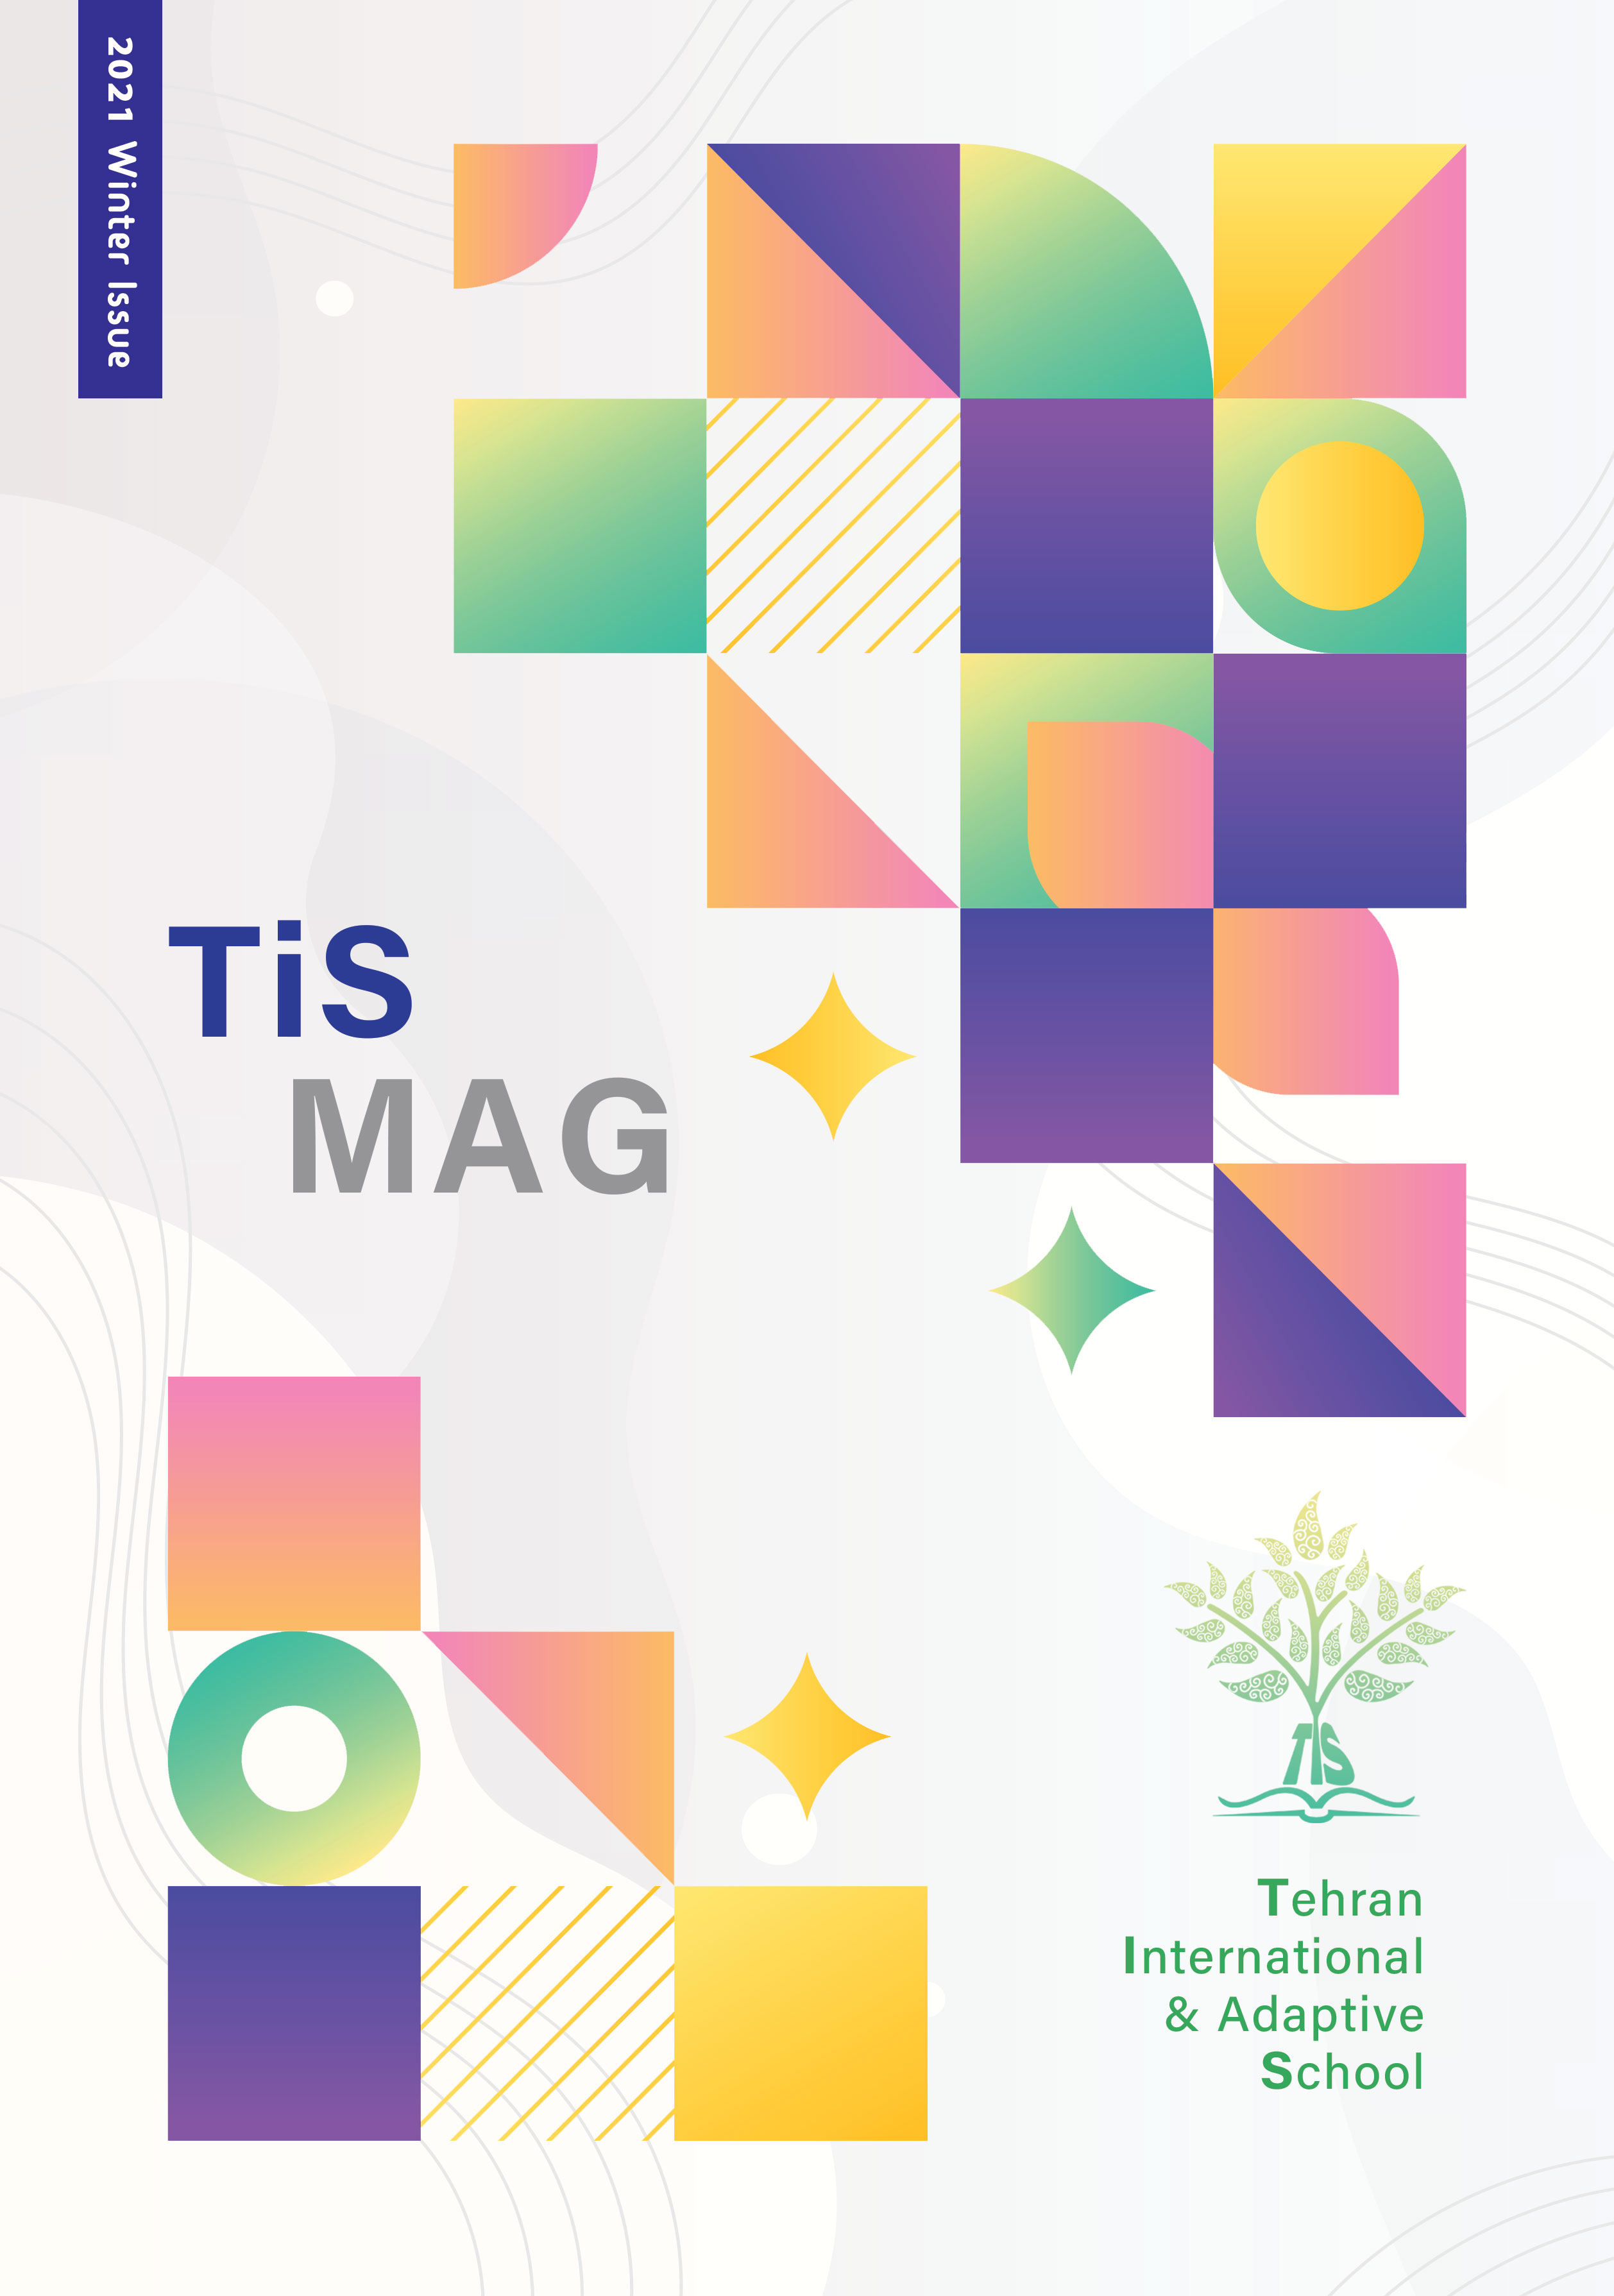 TiSMAG_March 25th, 2021